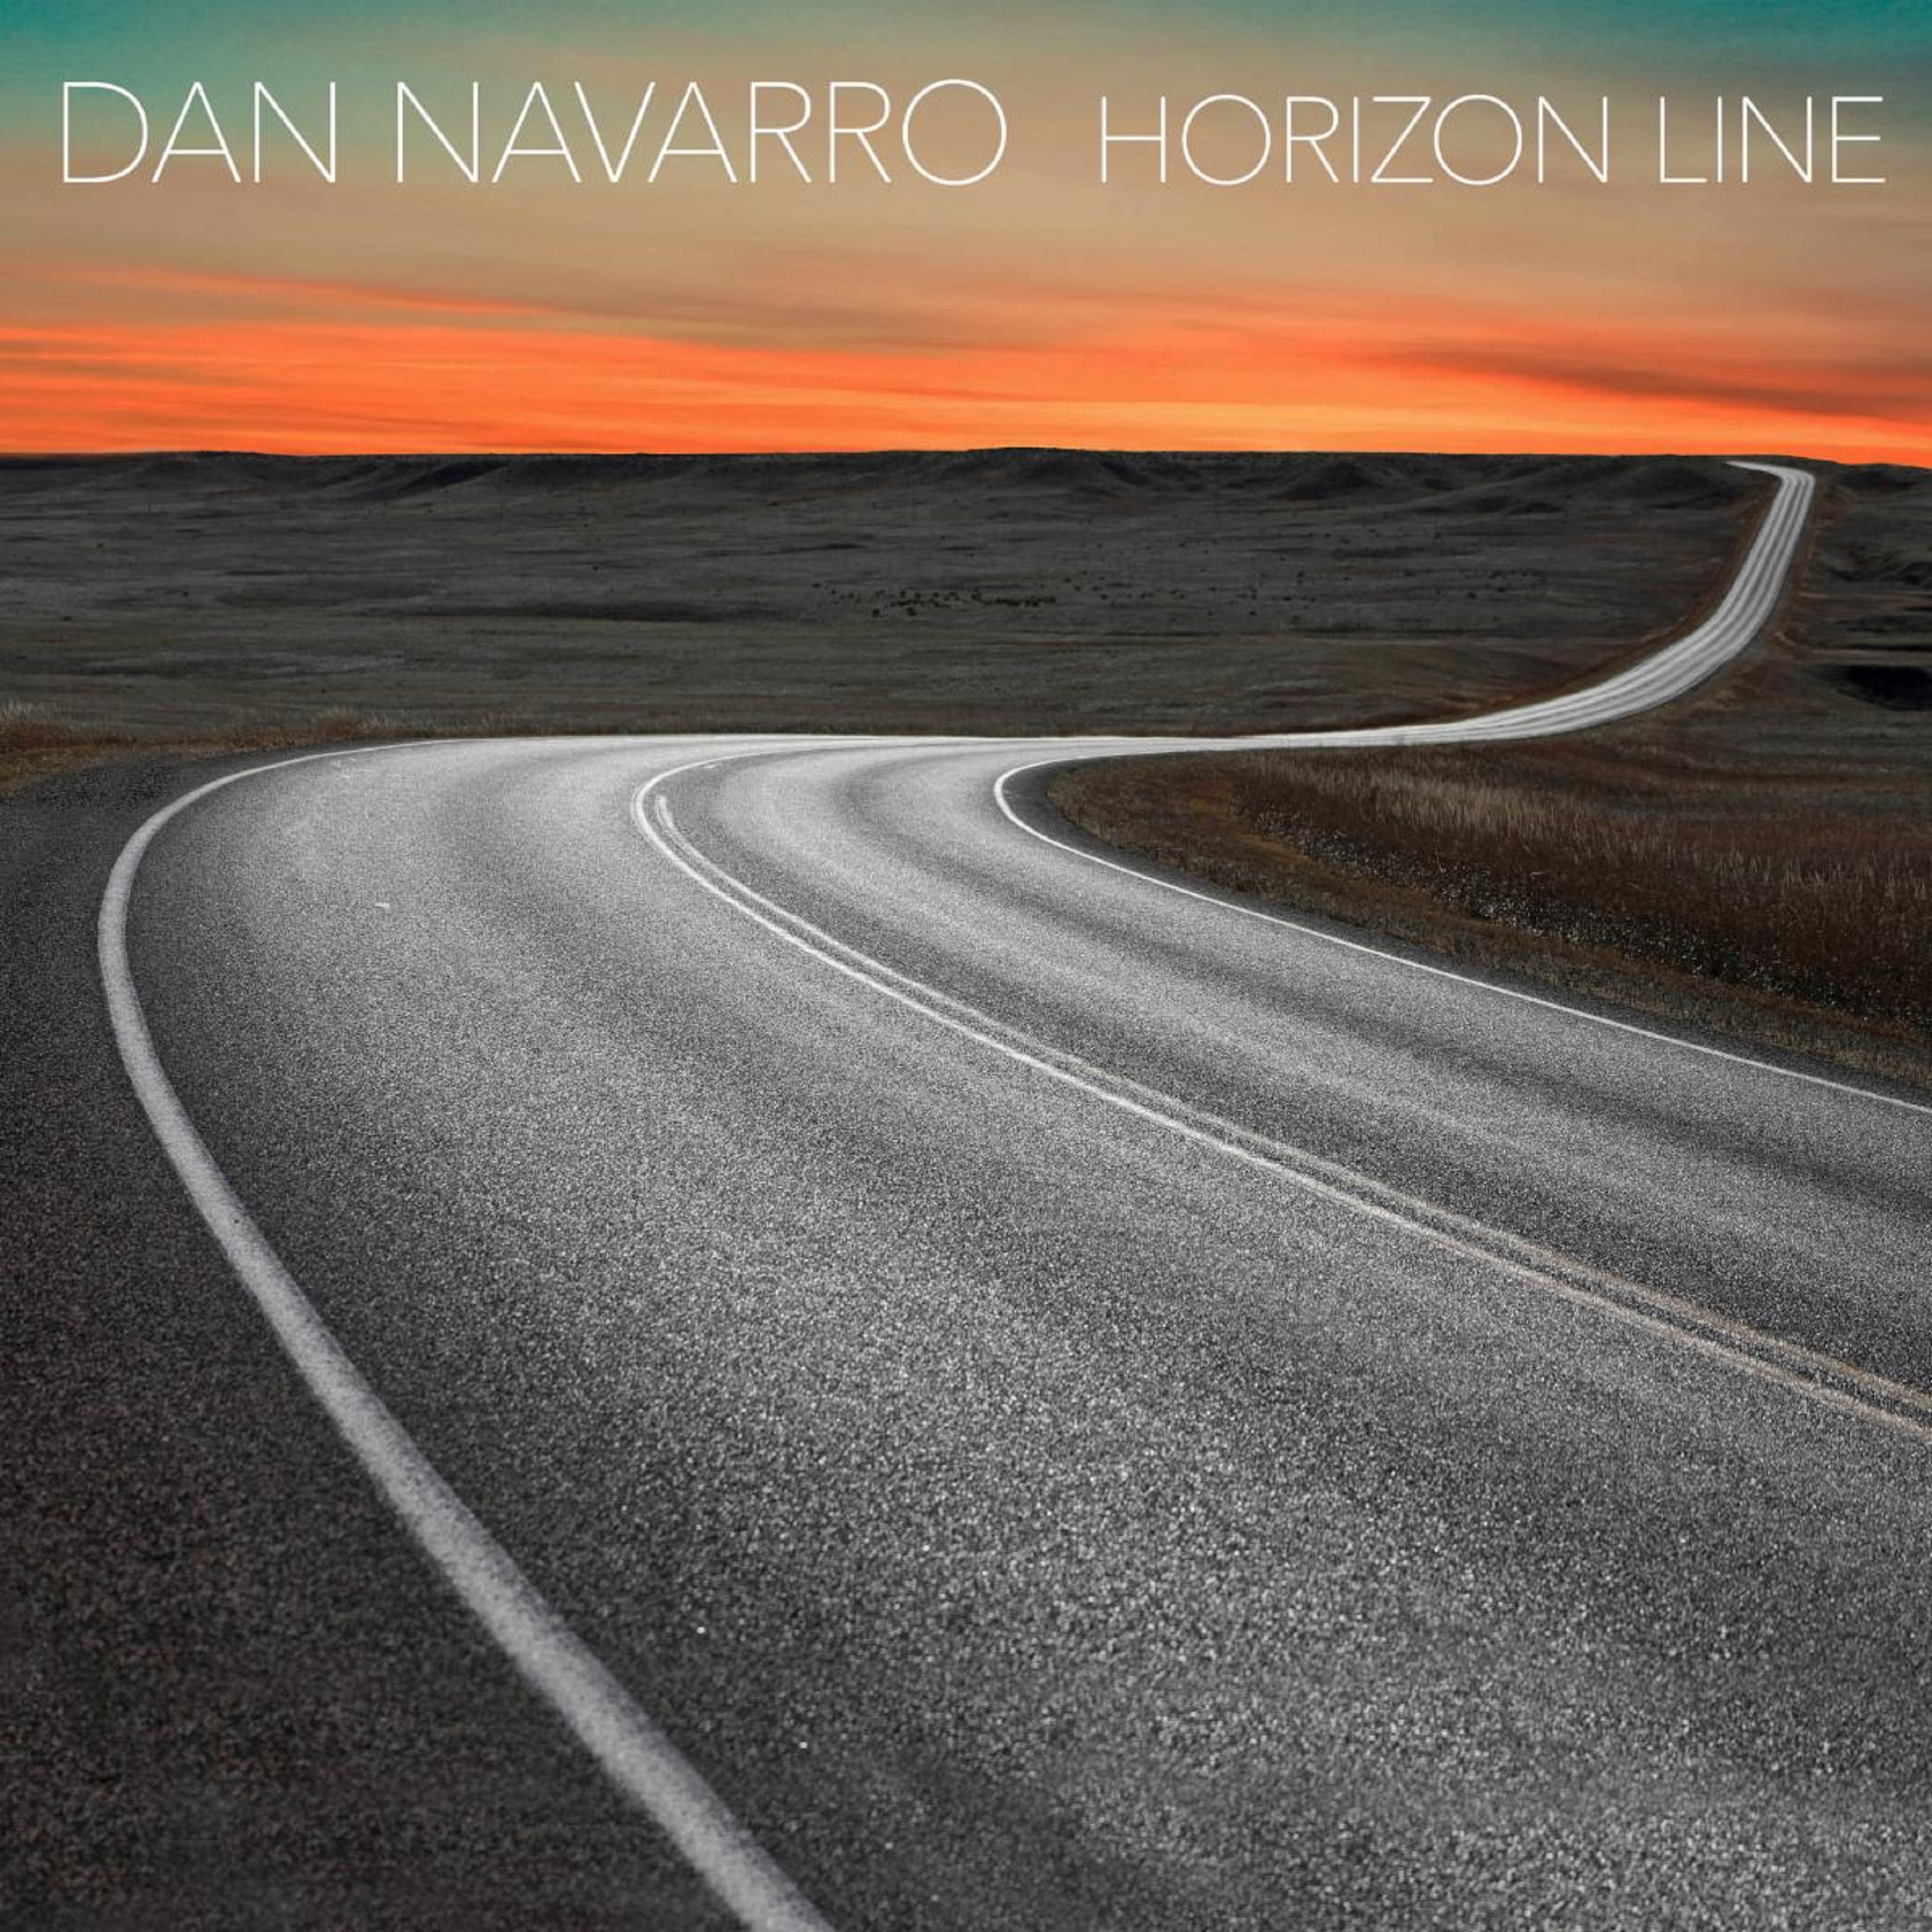 Dan Navarro -Singer/songwriter, guitarist and voice actor shares new music from upcoming album 'Horizon Line' out on August 26